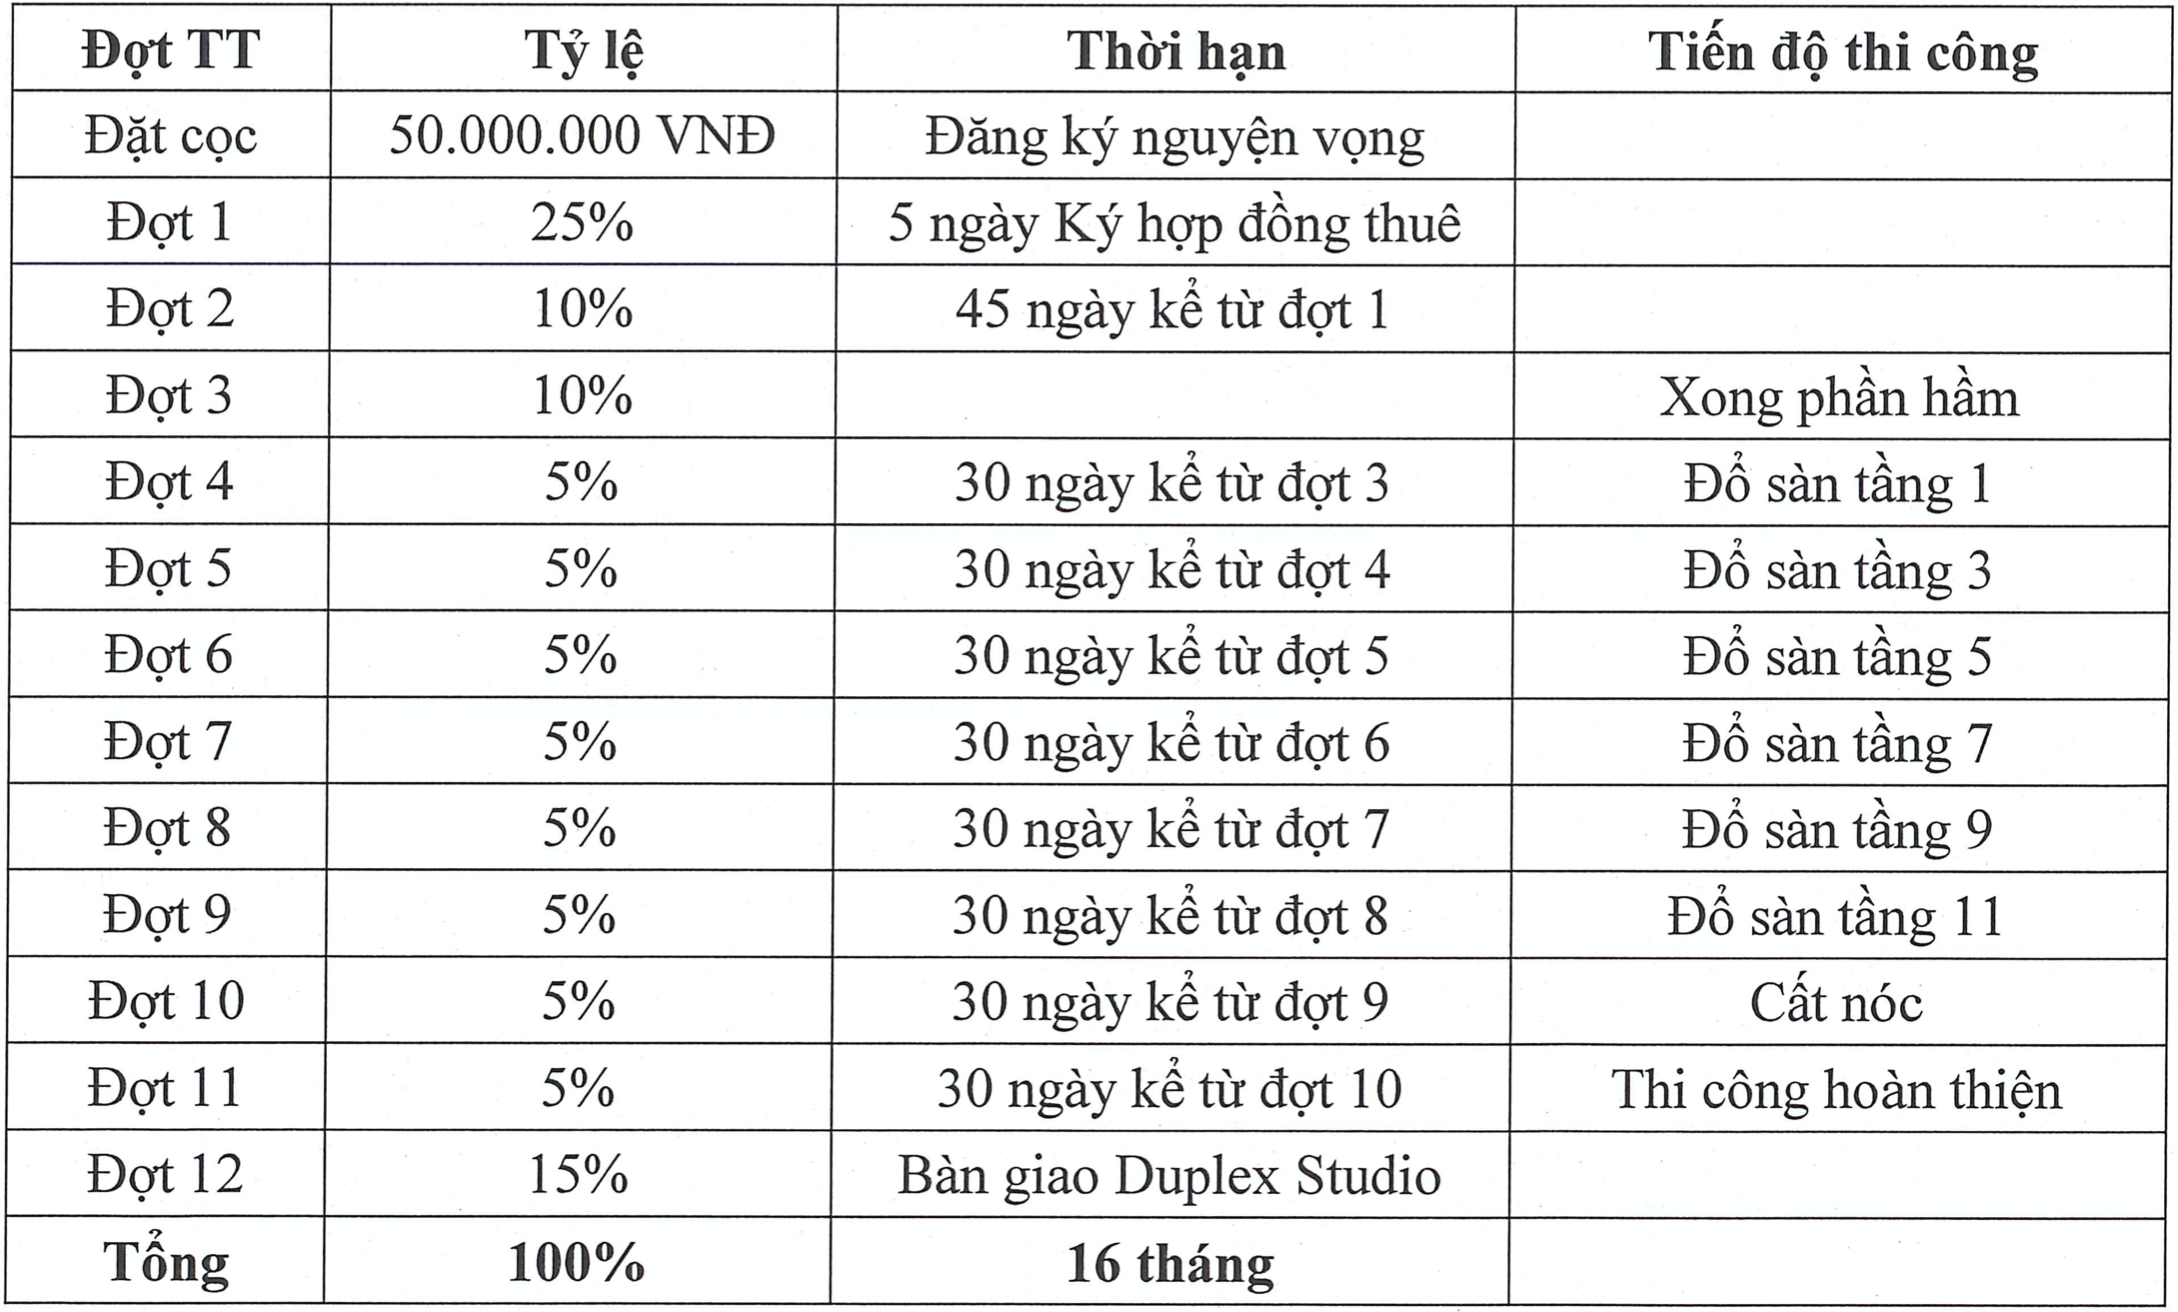 Tien do thanh toan MD